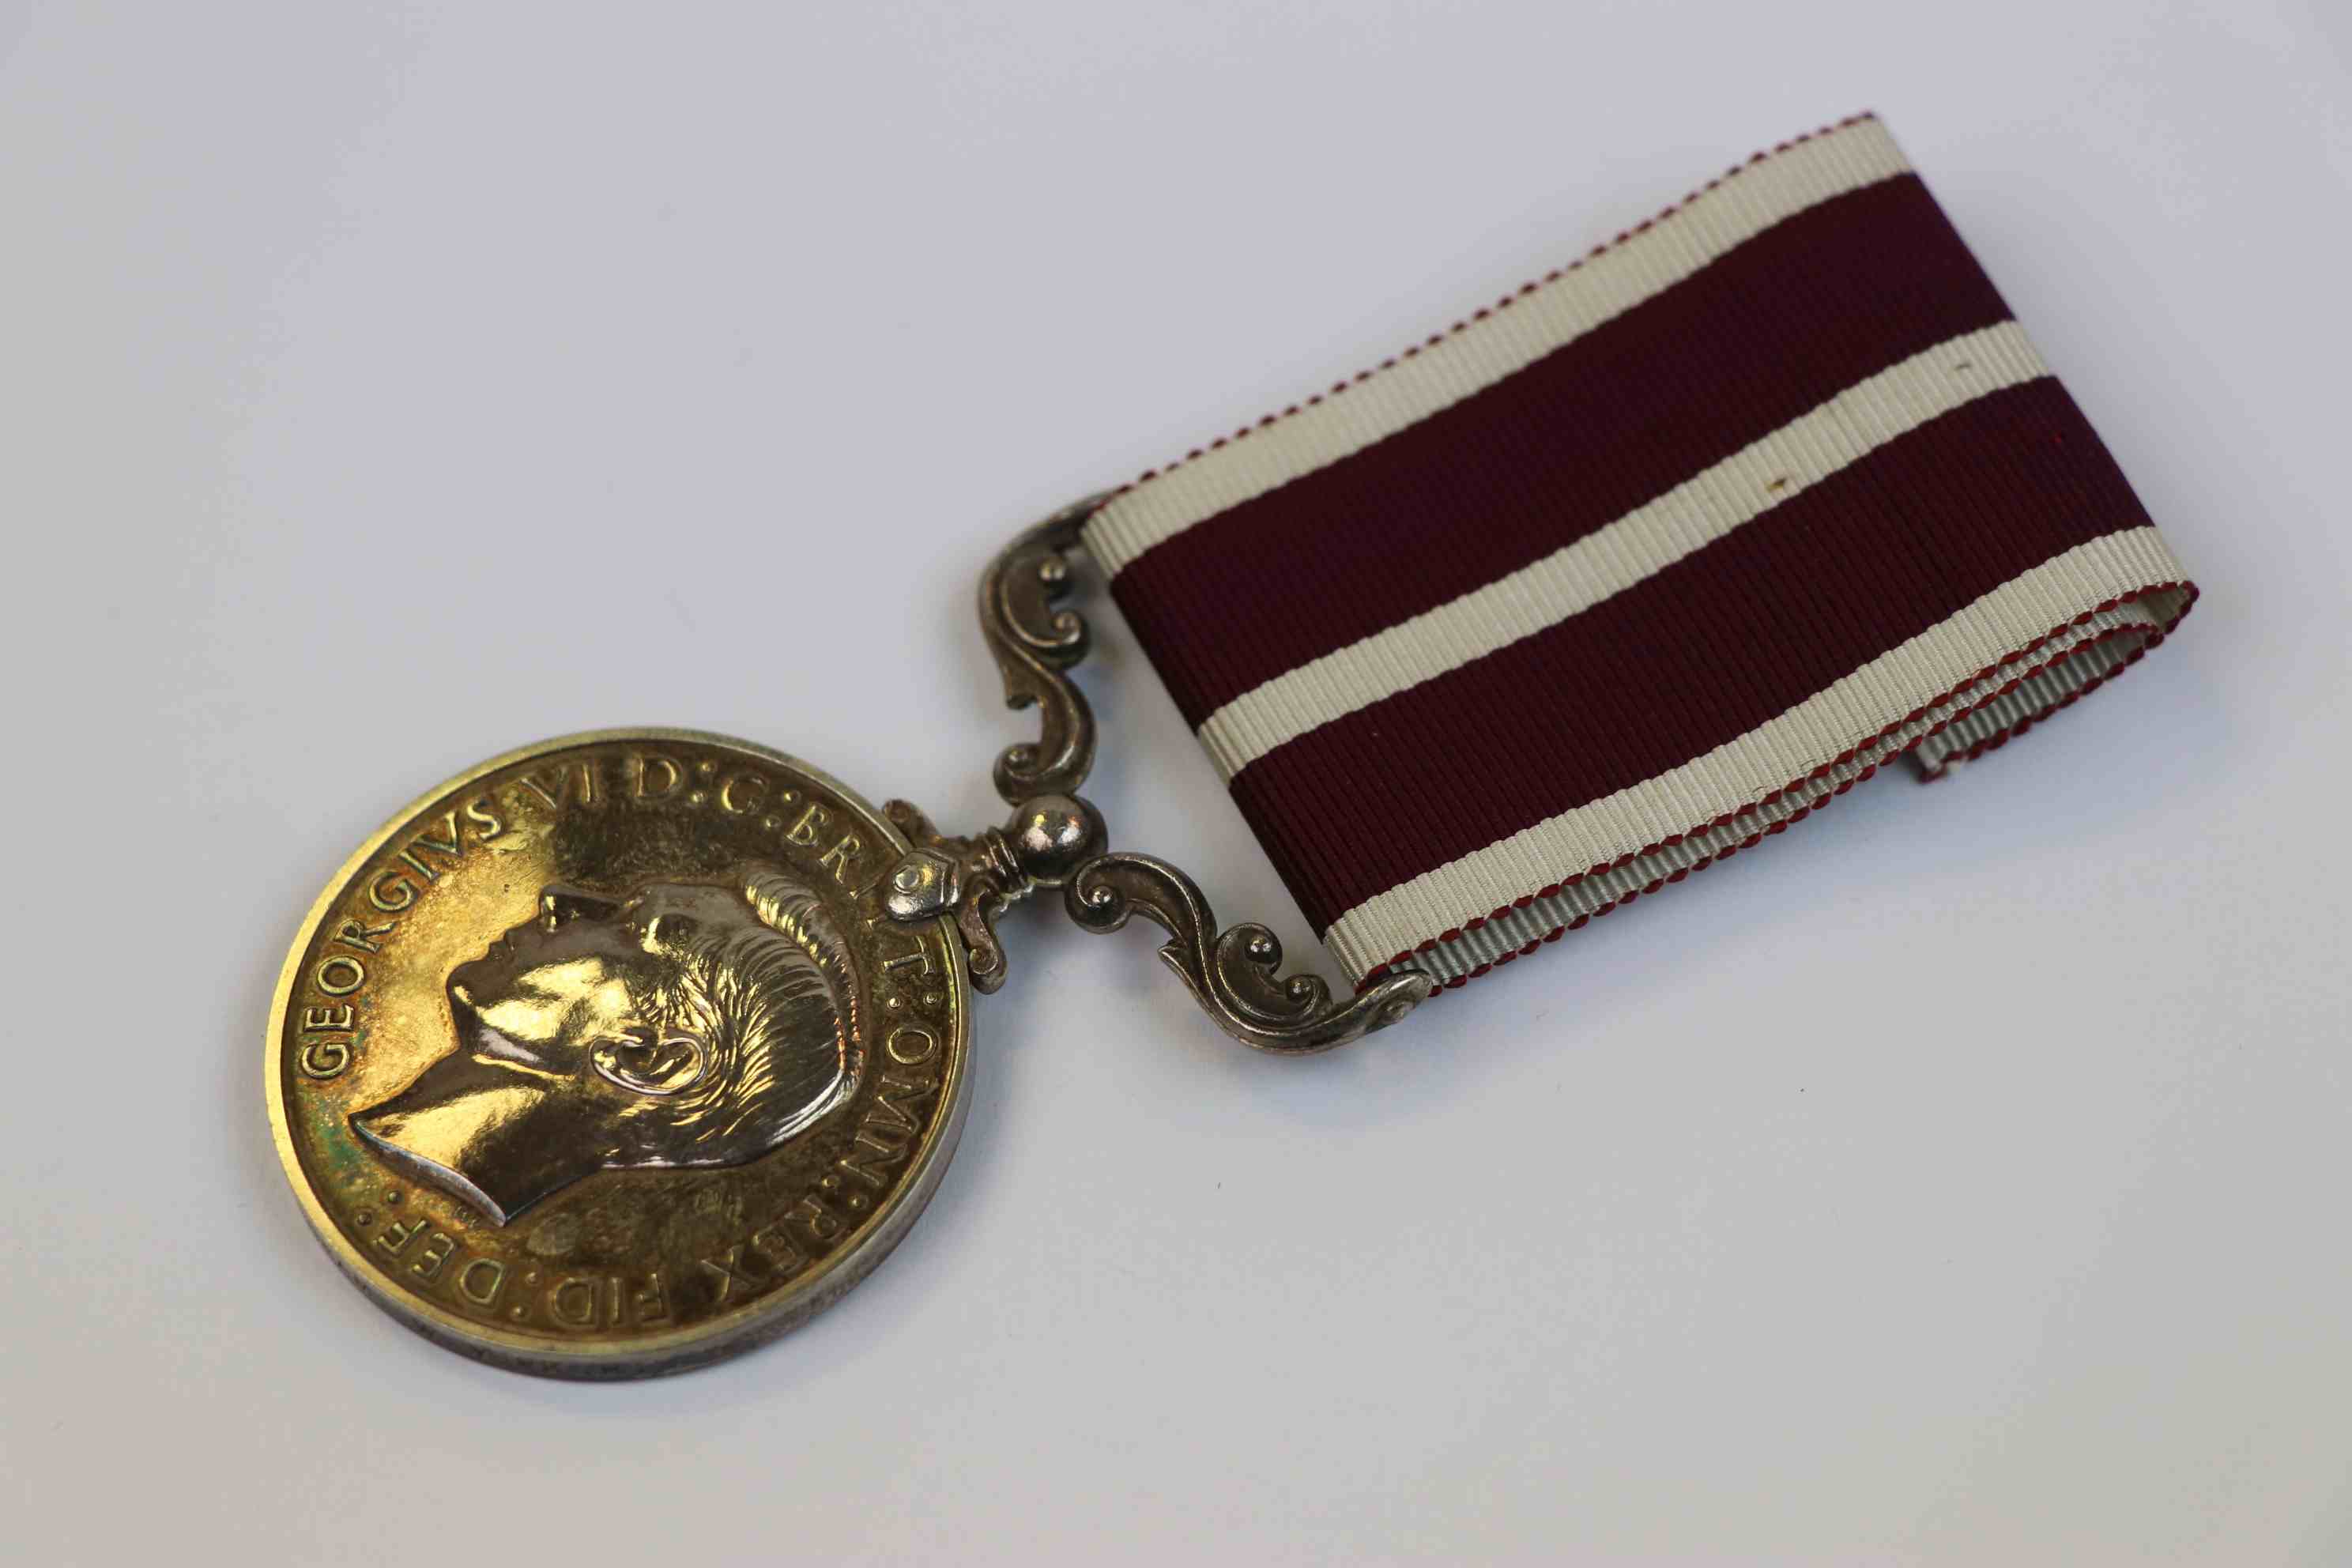 A Full Size King George VI British Army Meritorious Service Medal Issued To 4523853 SJT. J.W. ORAM - Image 11 of 11